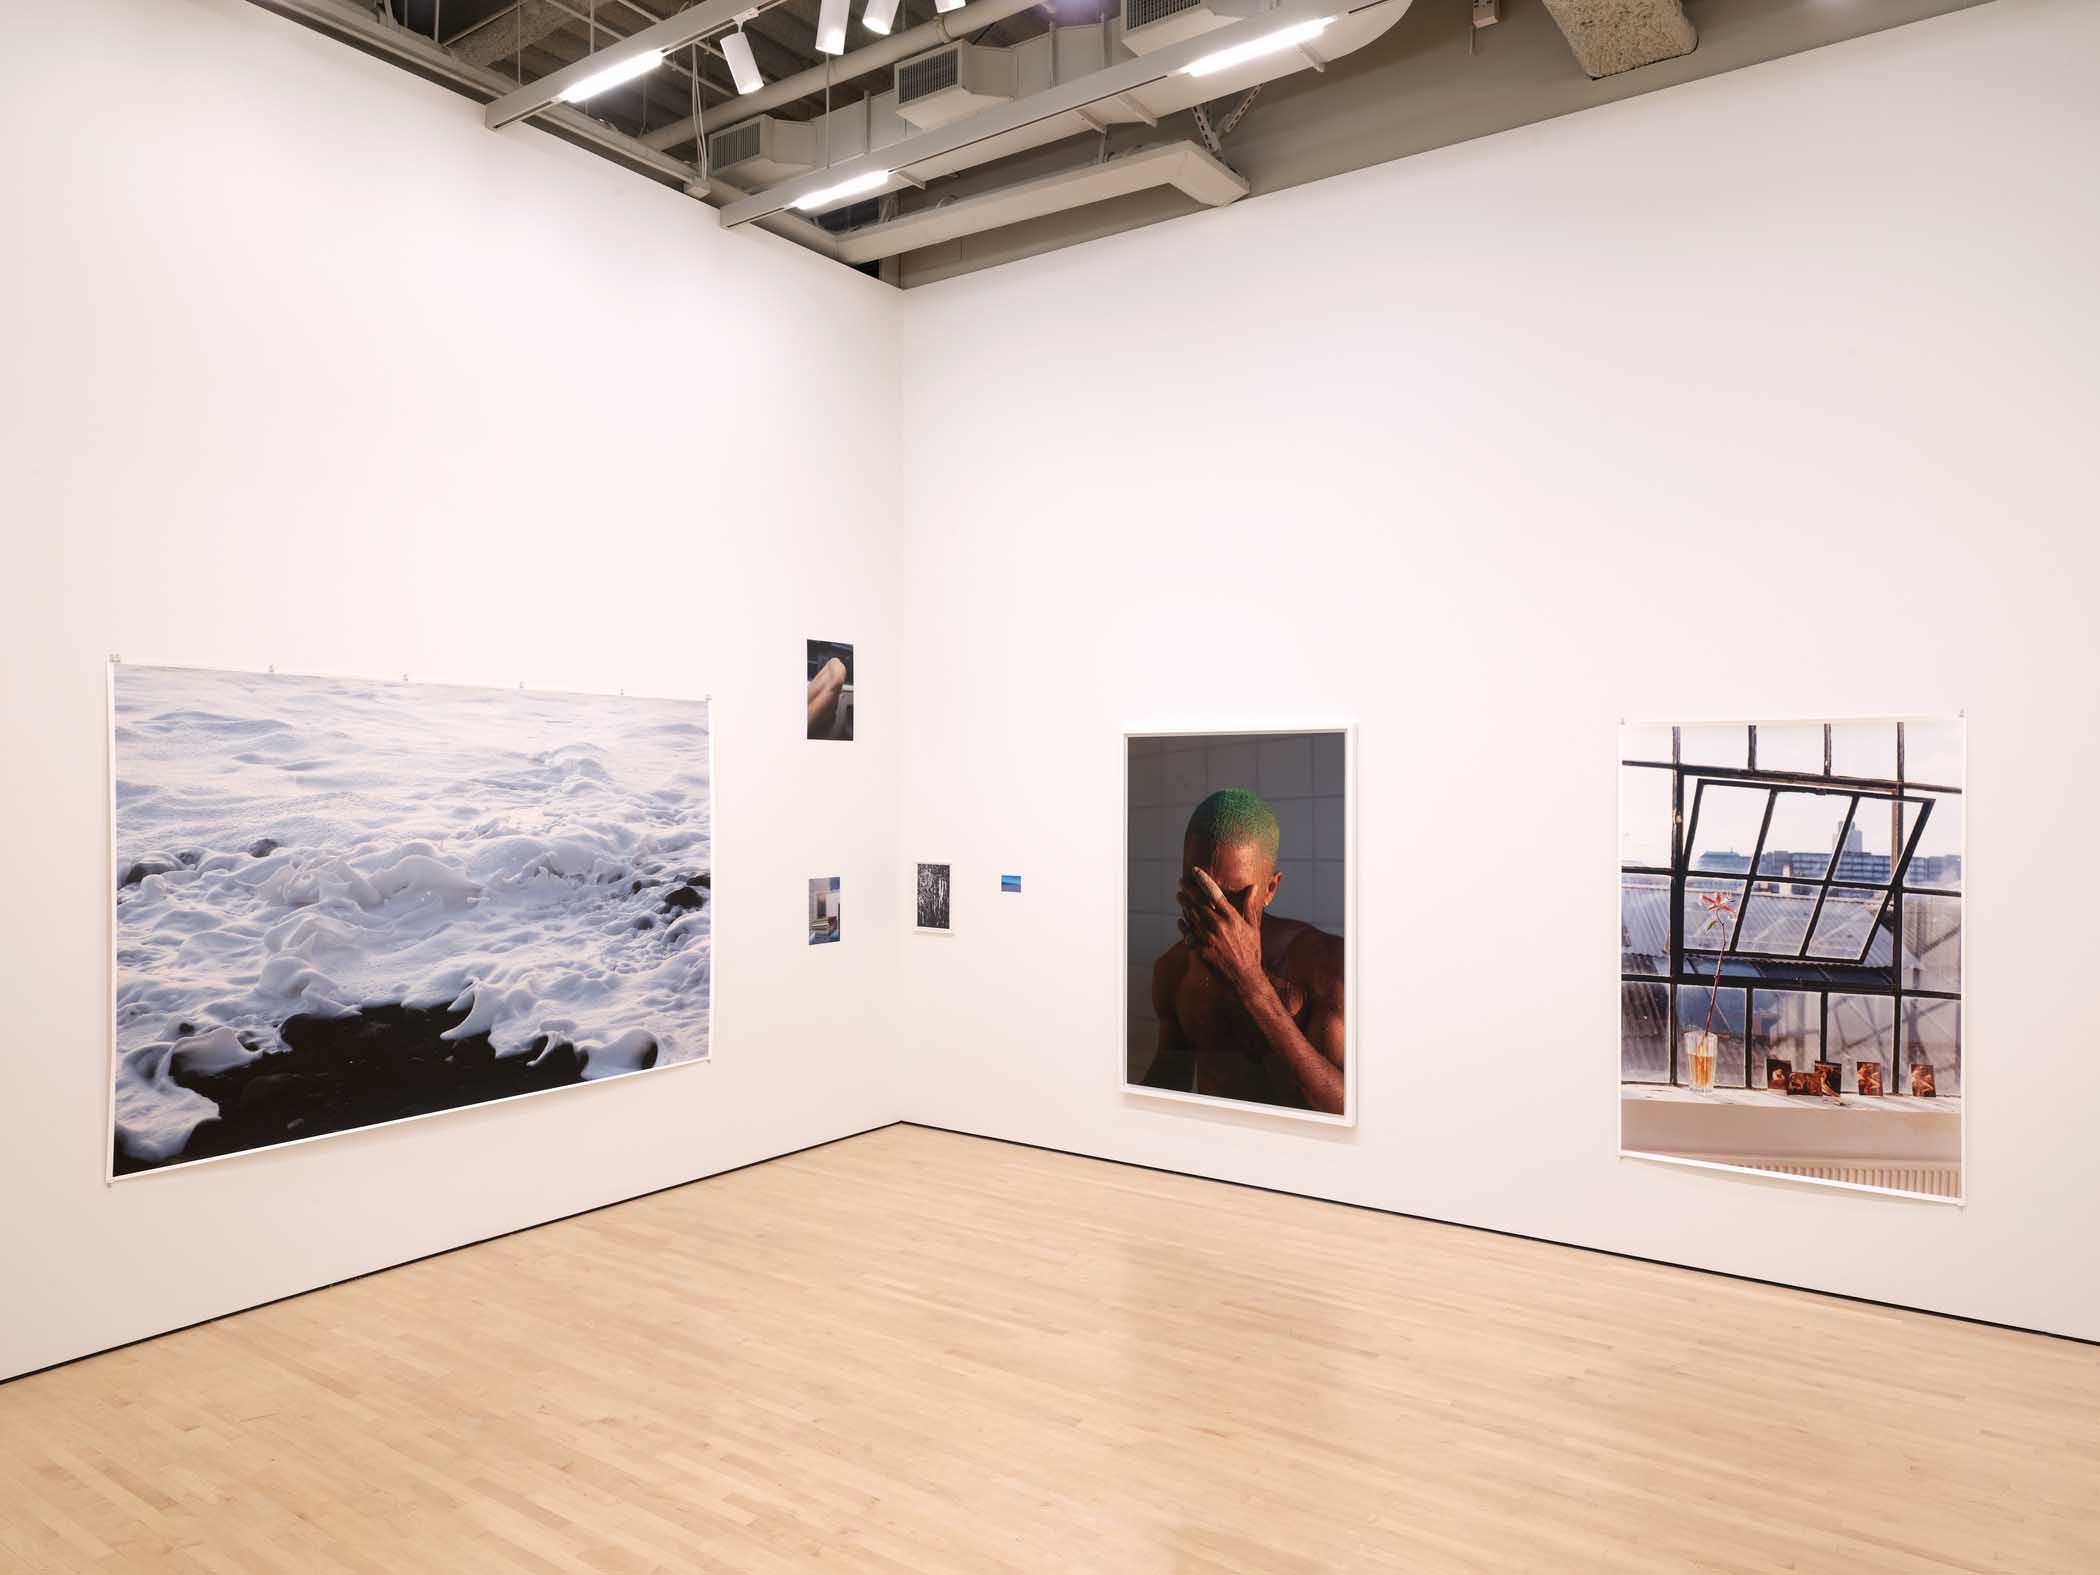 Wolfgang Tillmans: To look without fear” at SFMOMA, San Francisco 